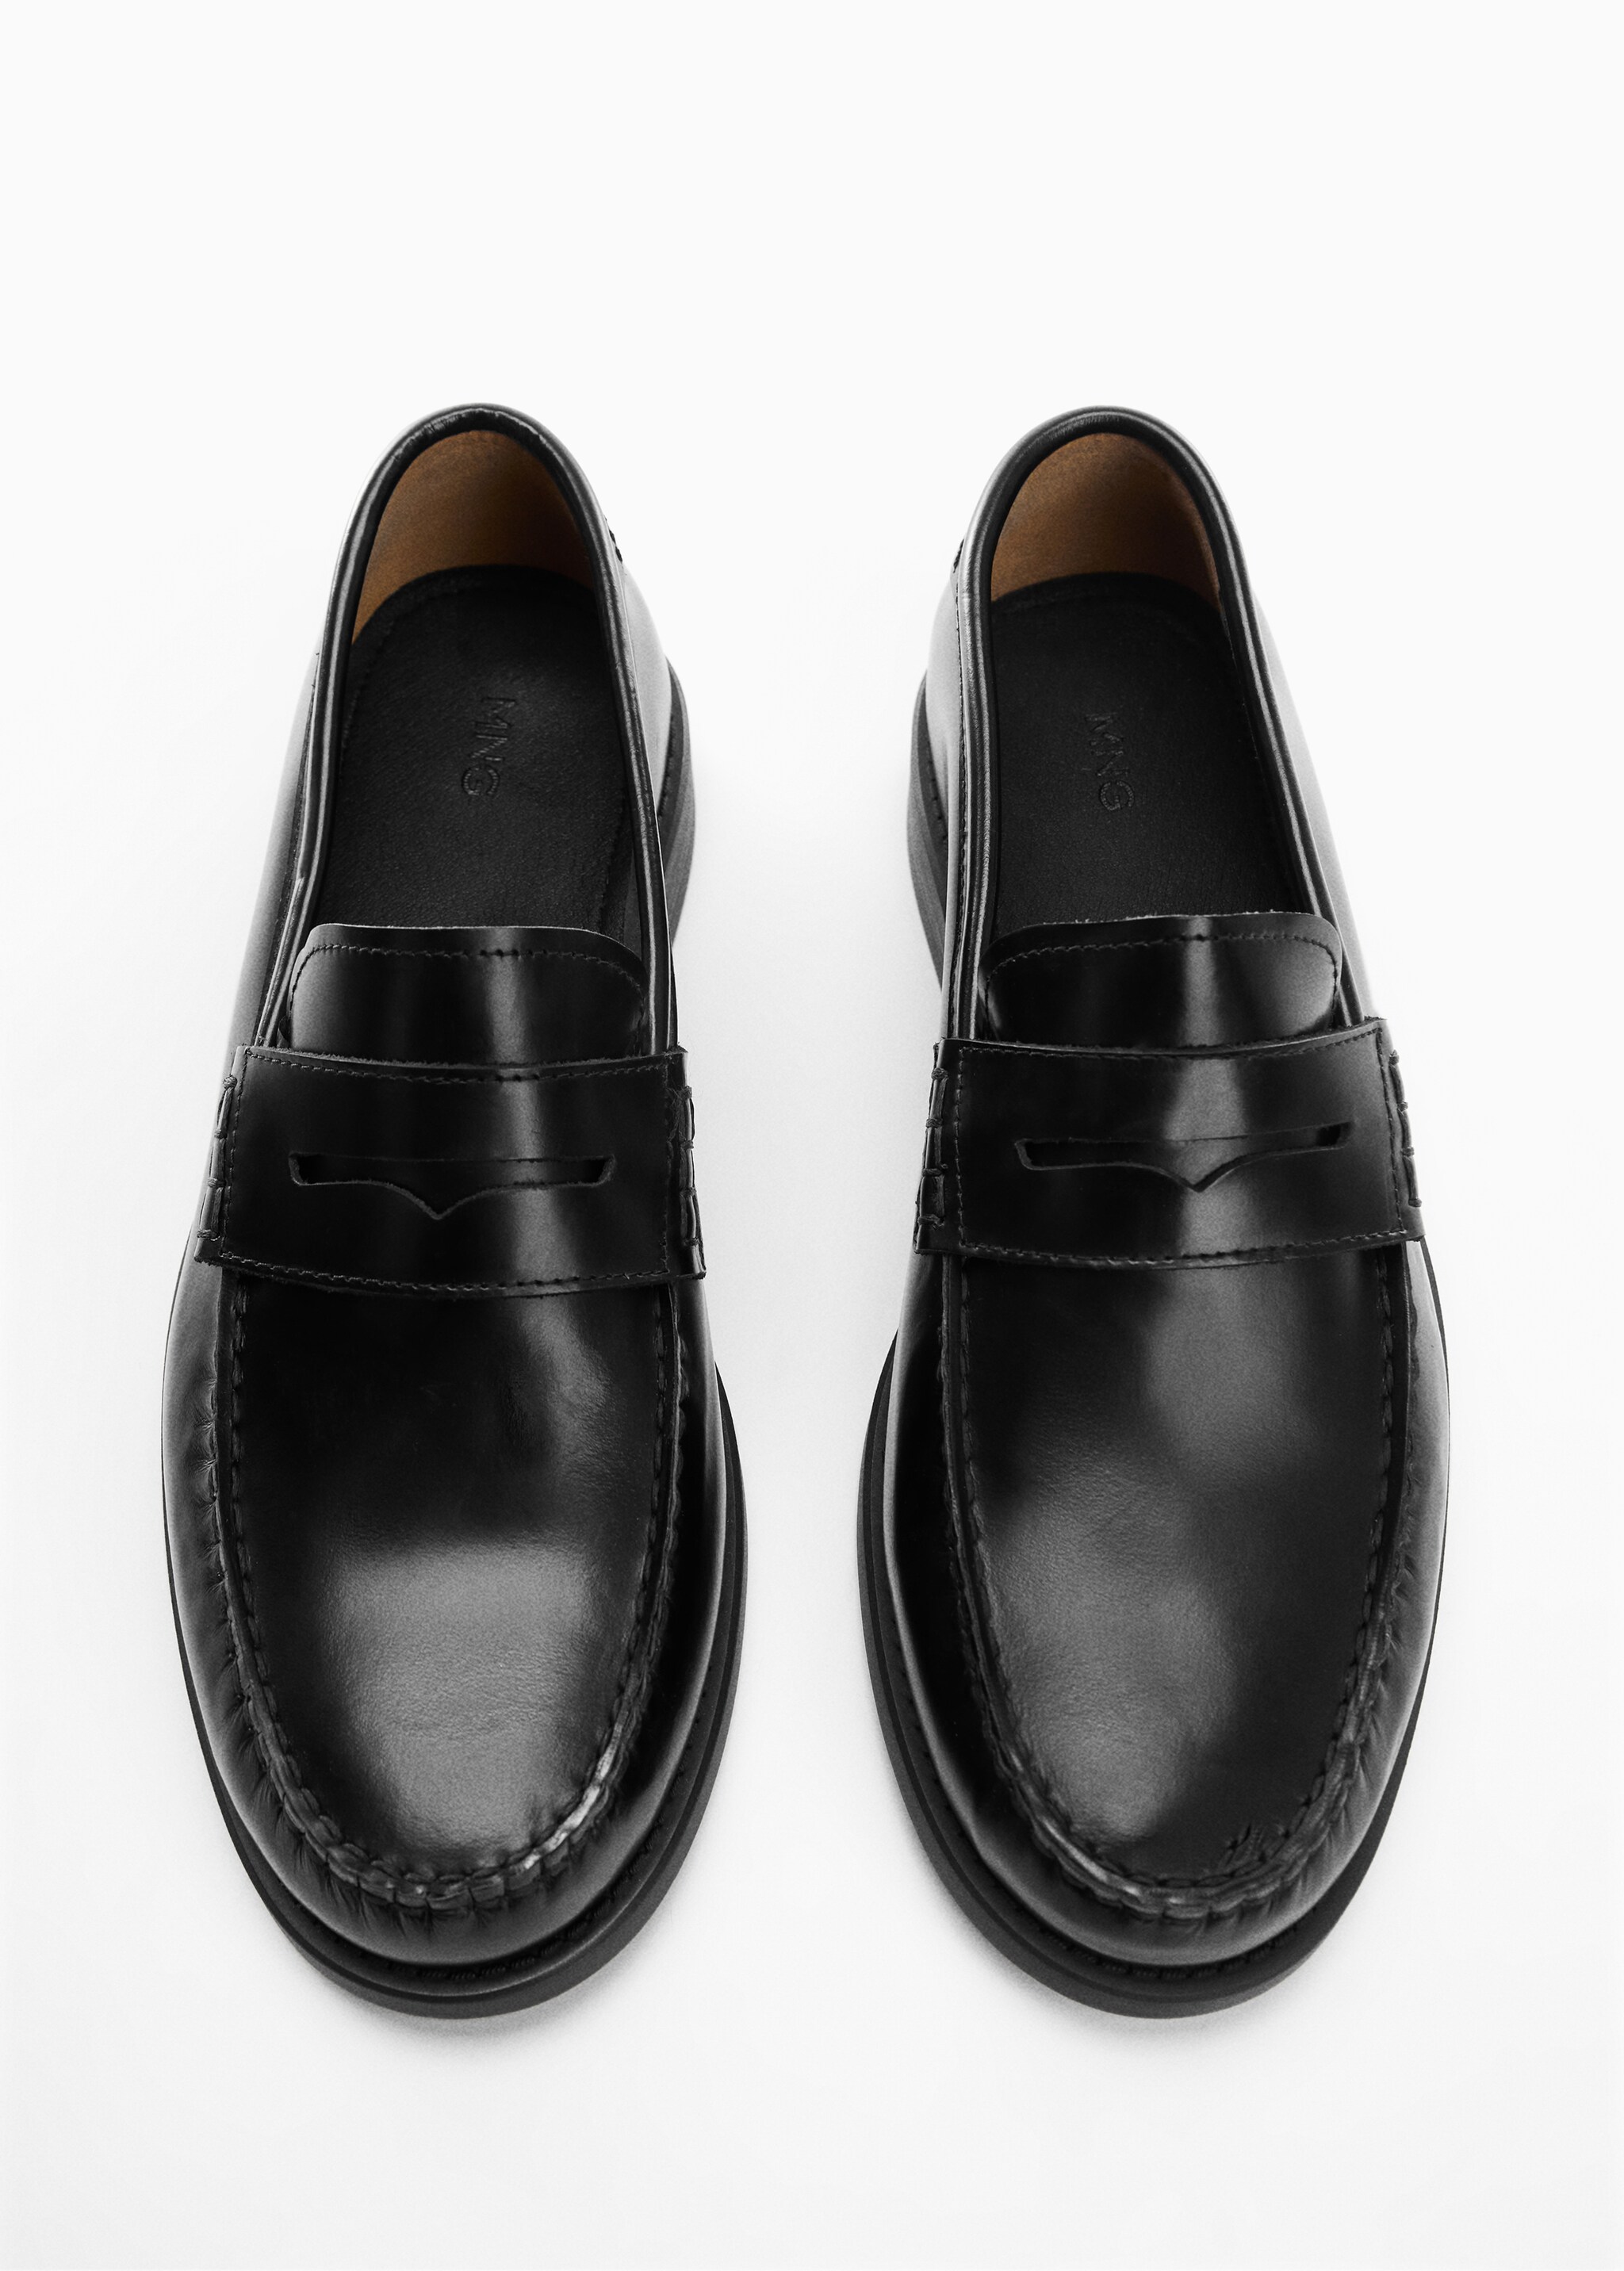 Aged-leather loafers - Details of the article 3